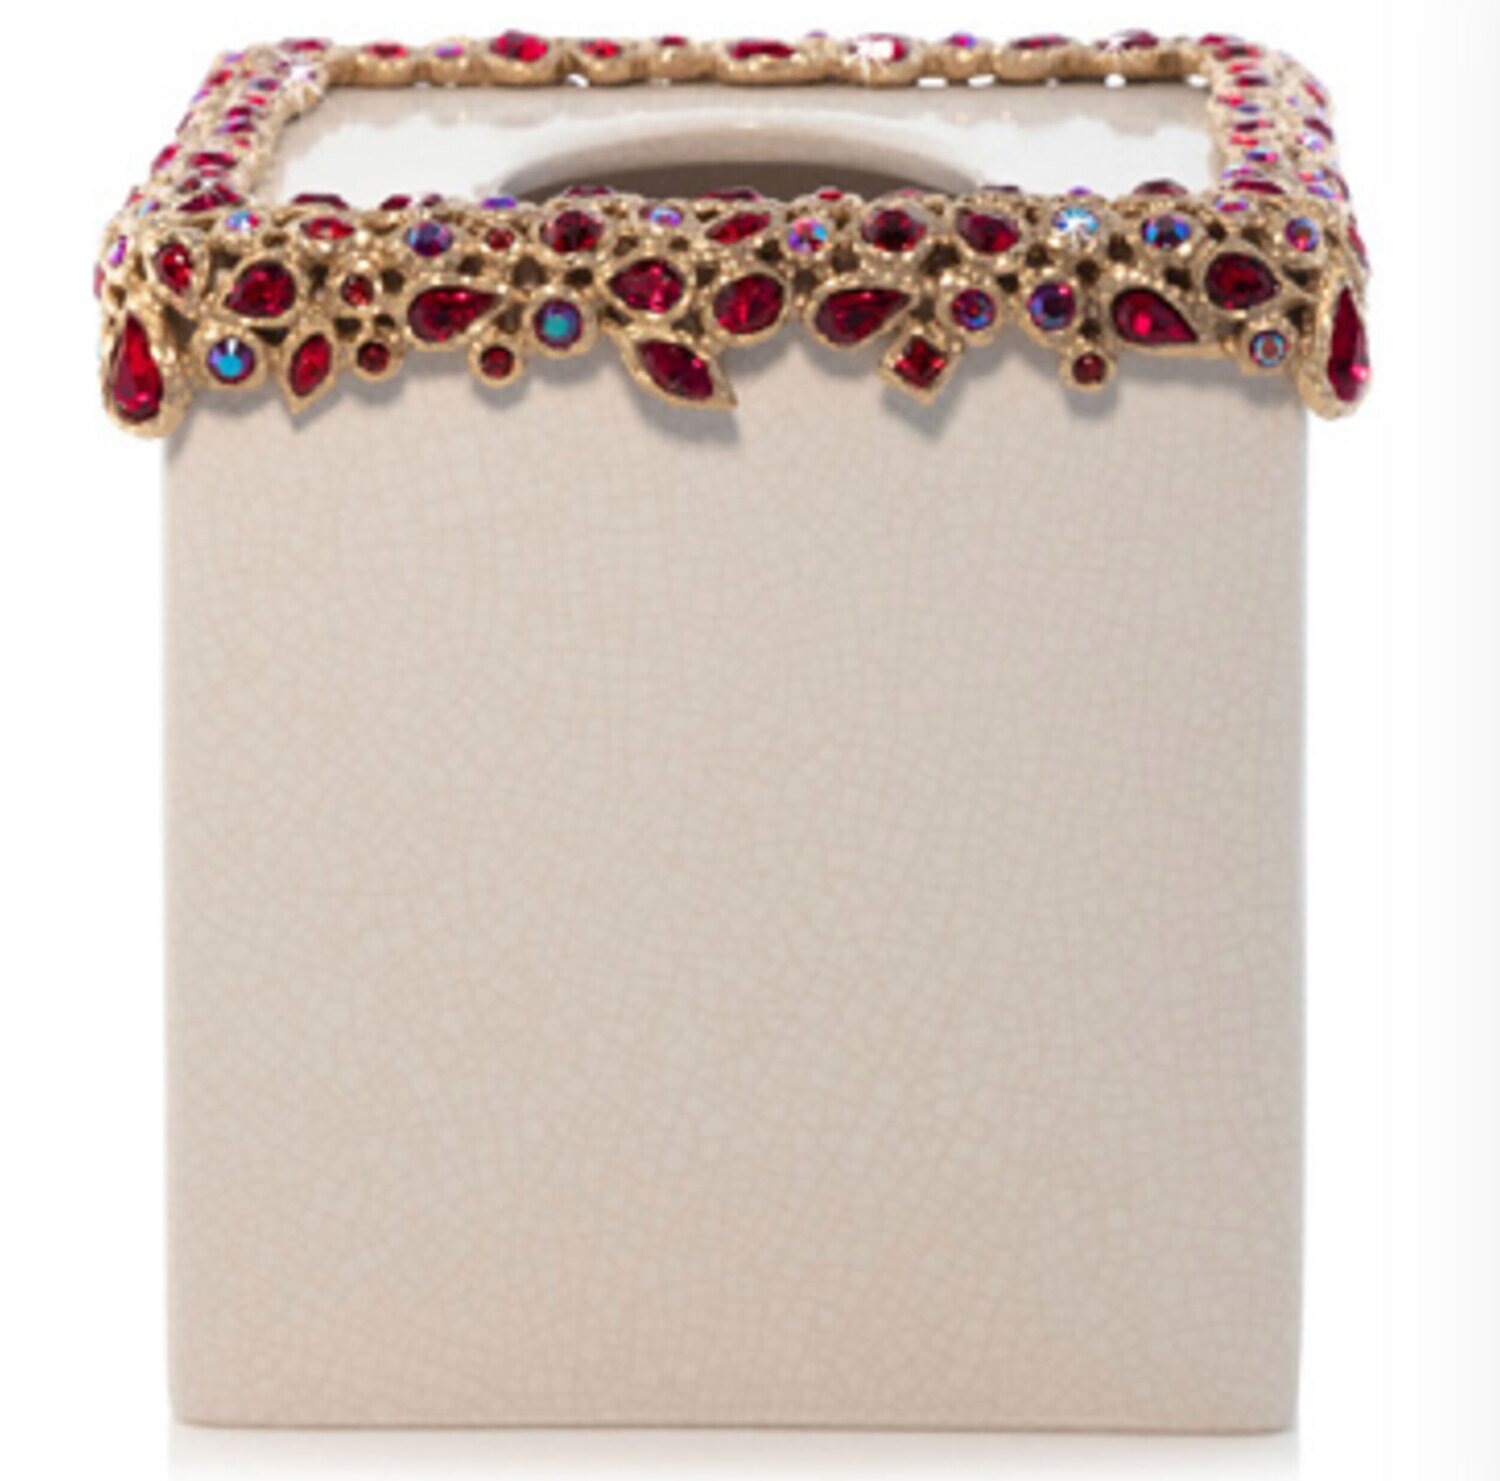 Jay Strongwater Emerson Bejeweled Tissue Box Ruby SDH8891-224